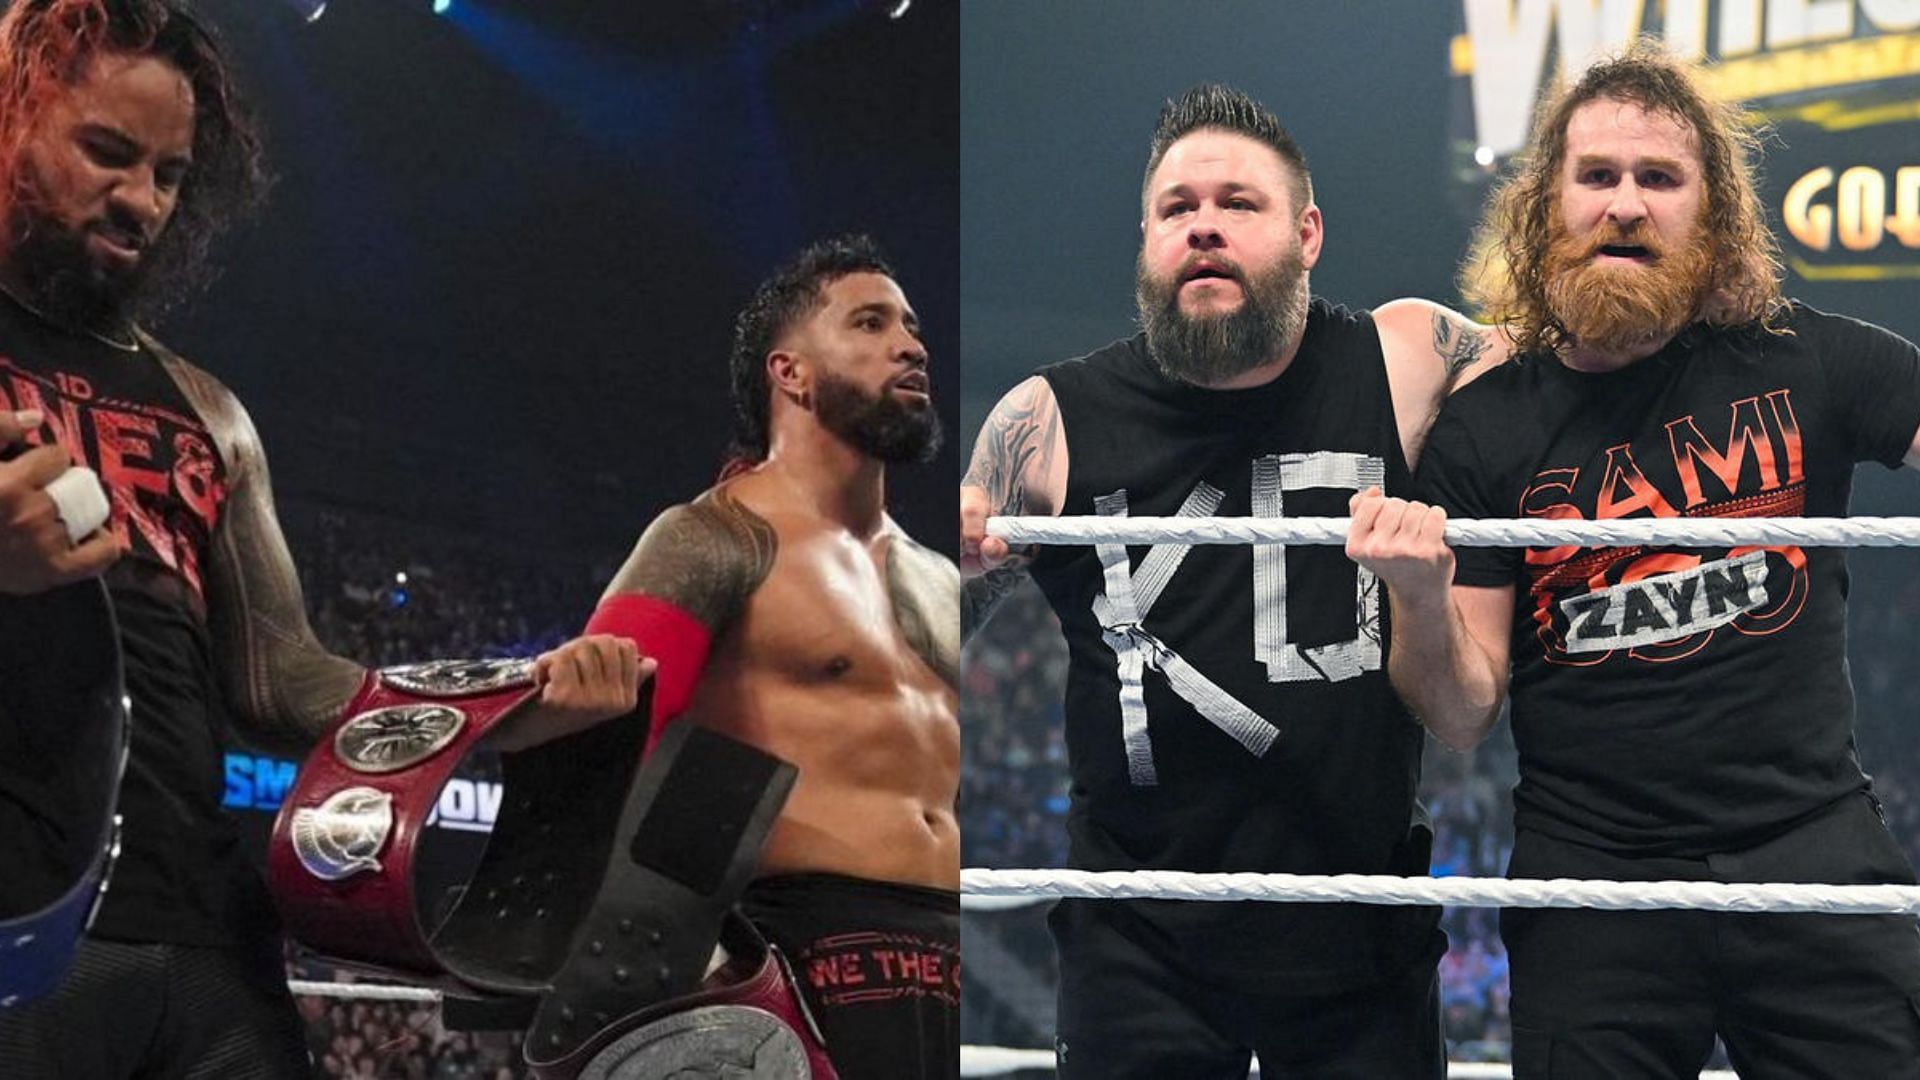 The Usos will face Kevin Owens and Sami Zayn at WrestleMania